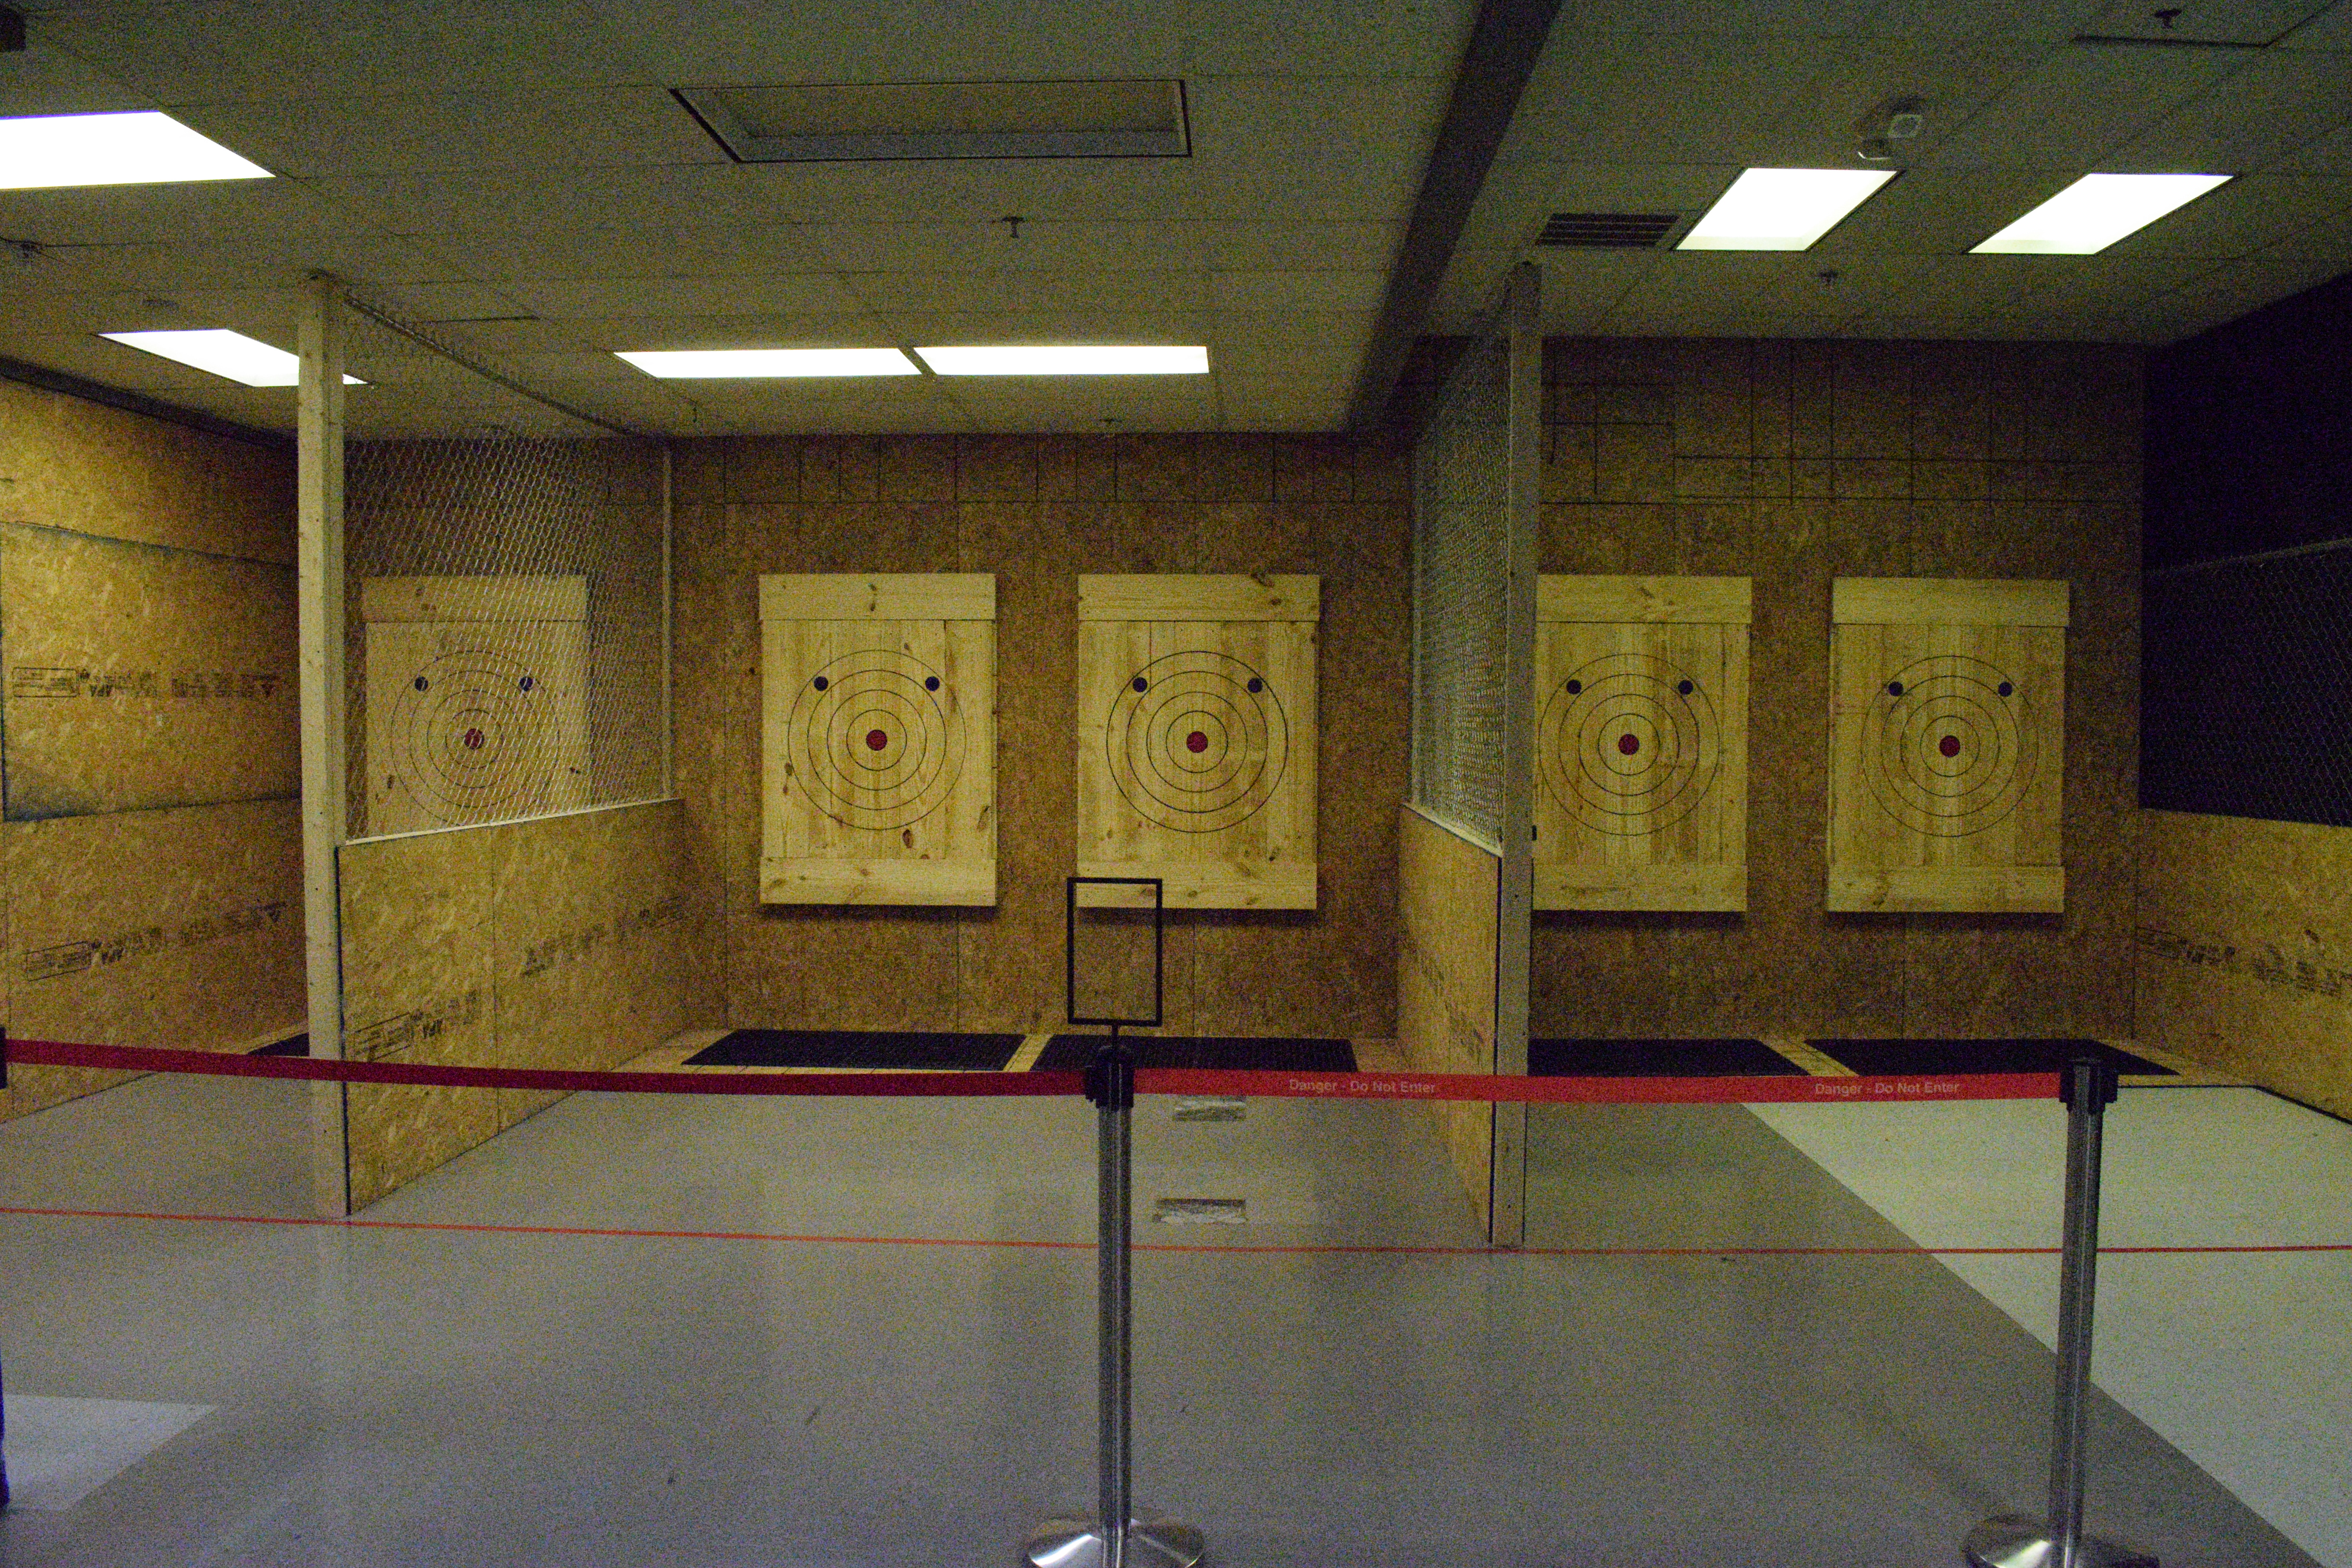 Stick it axe throwing is located in Tagtime Laser Tag's faculity in Newport News, Va.